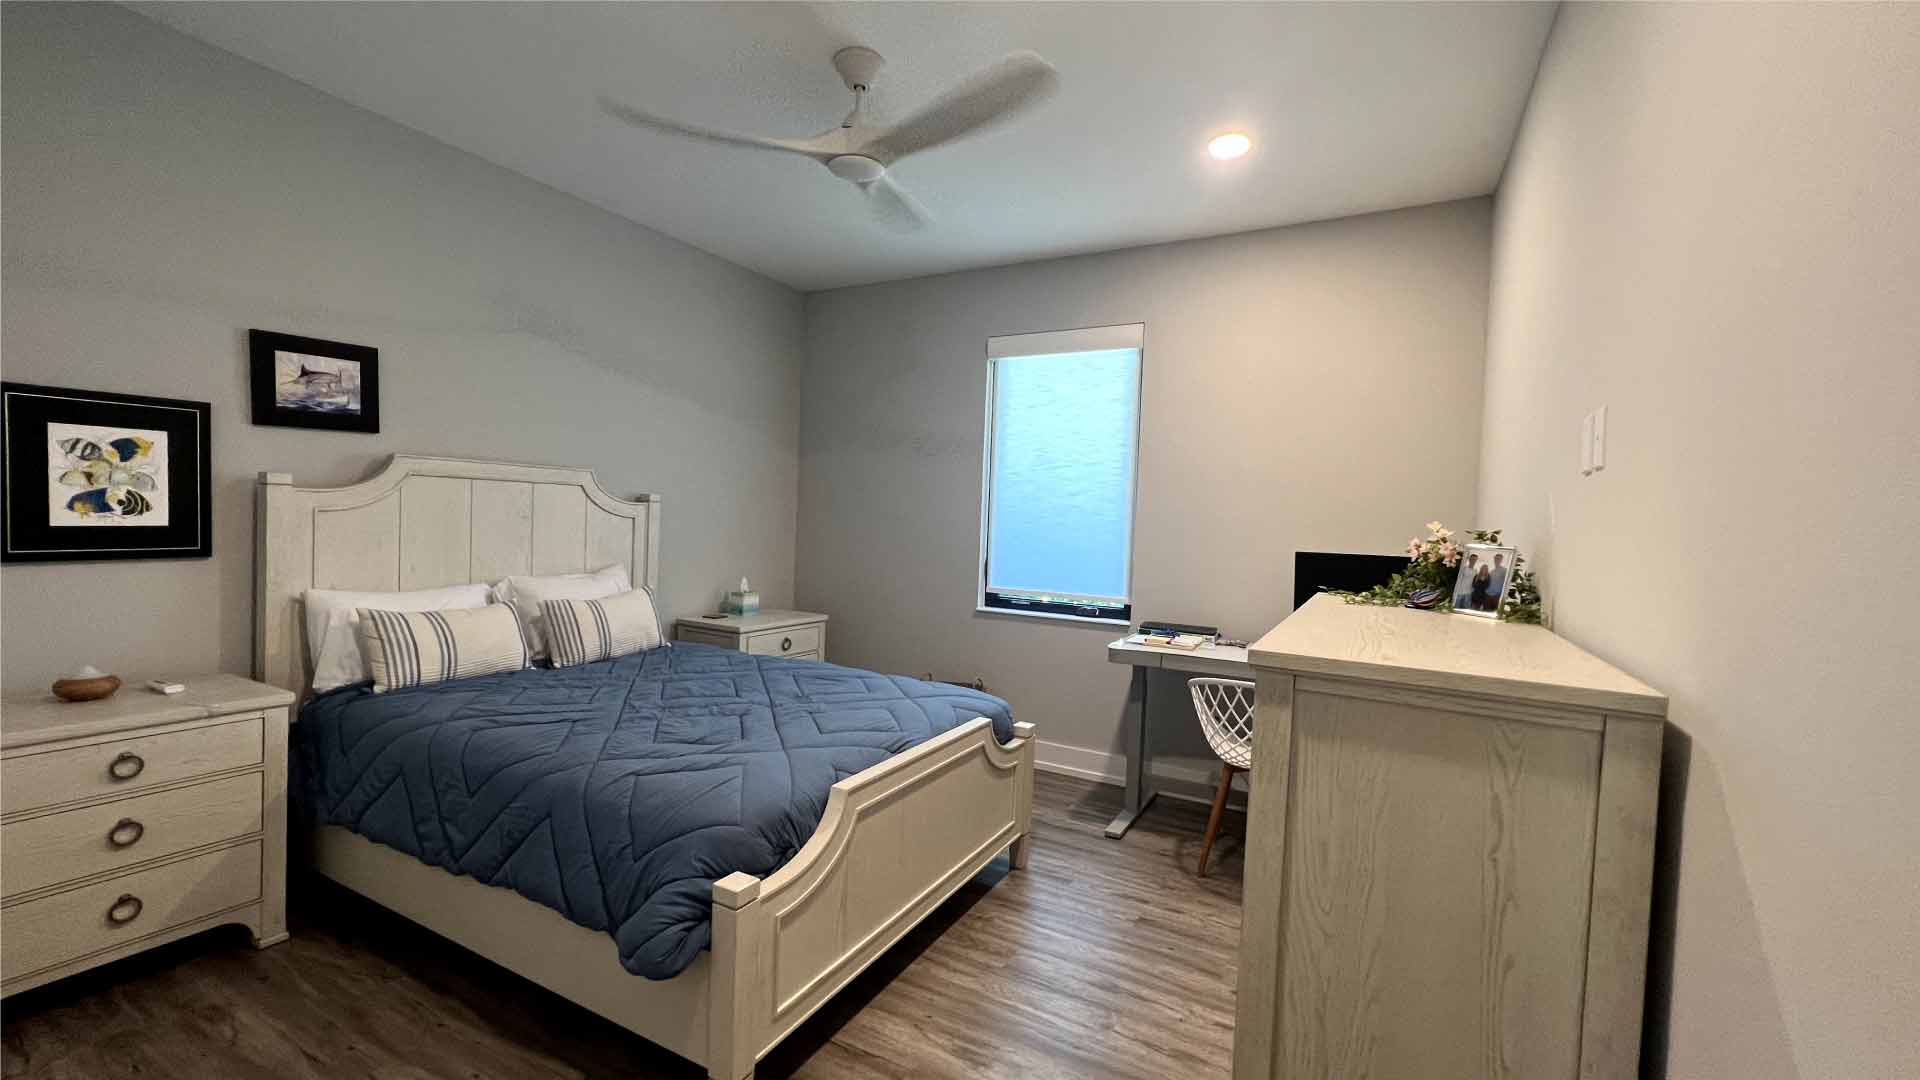 Bedroom - Deep cleaning in Cape Coral by Goldmillio - Apr 5